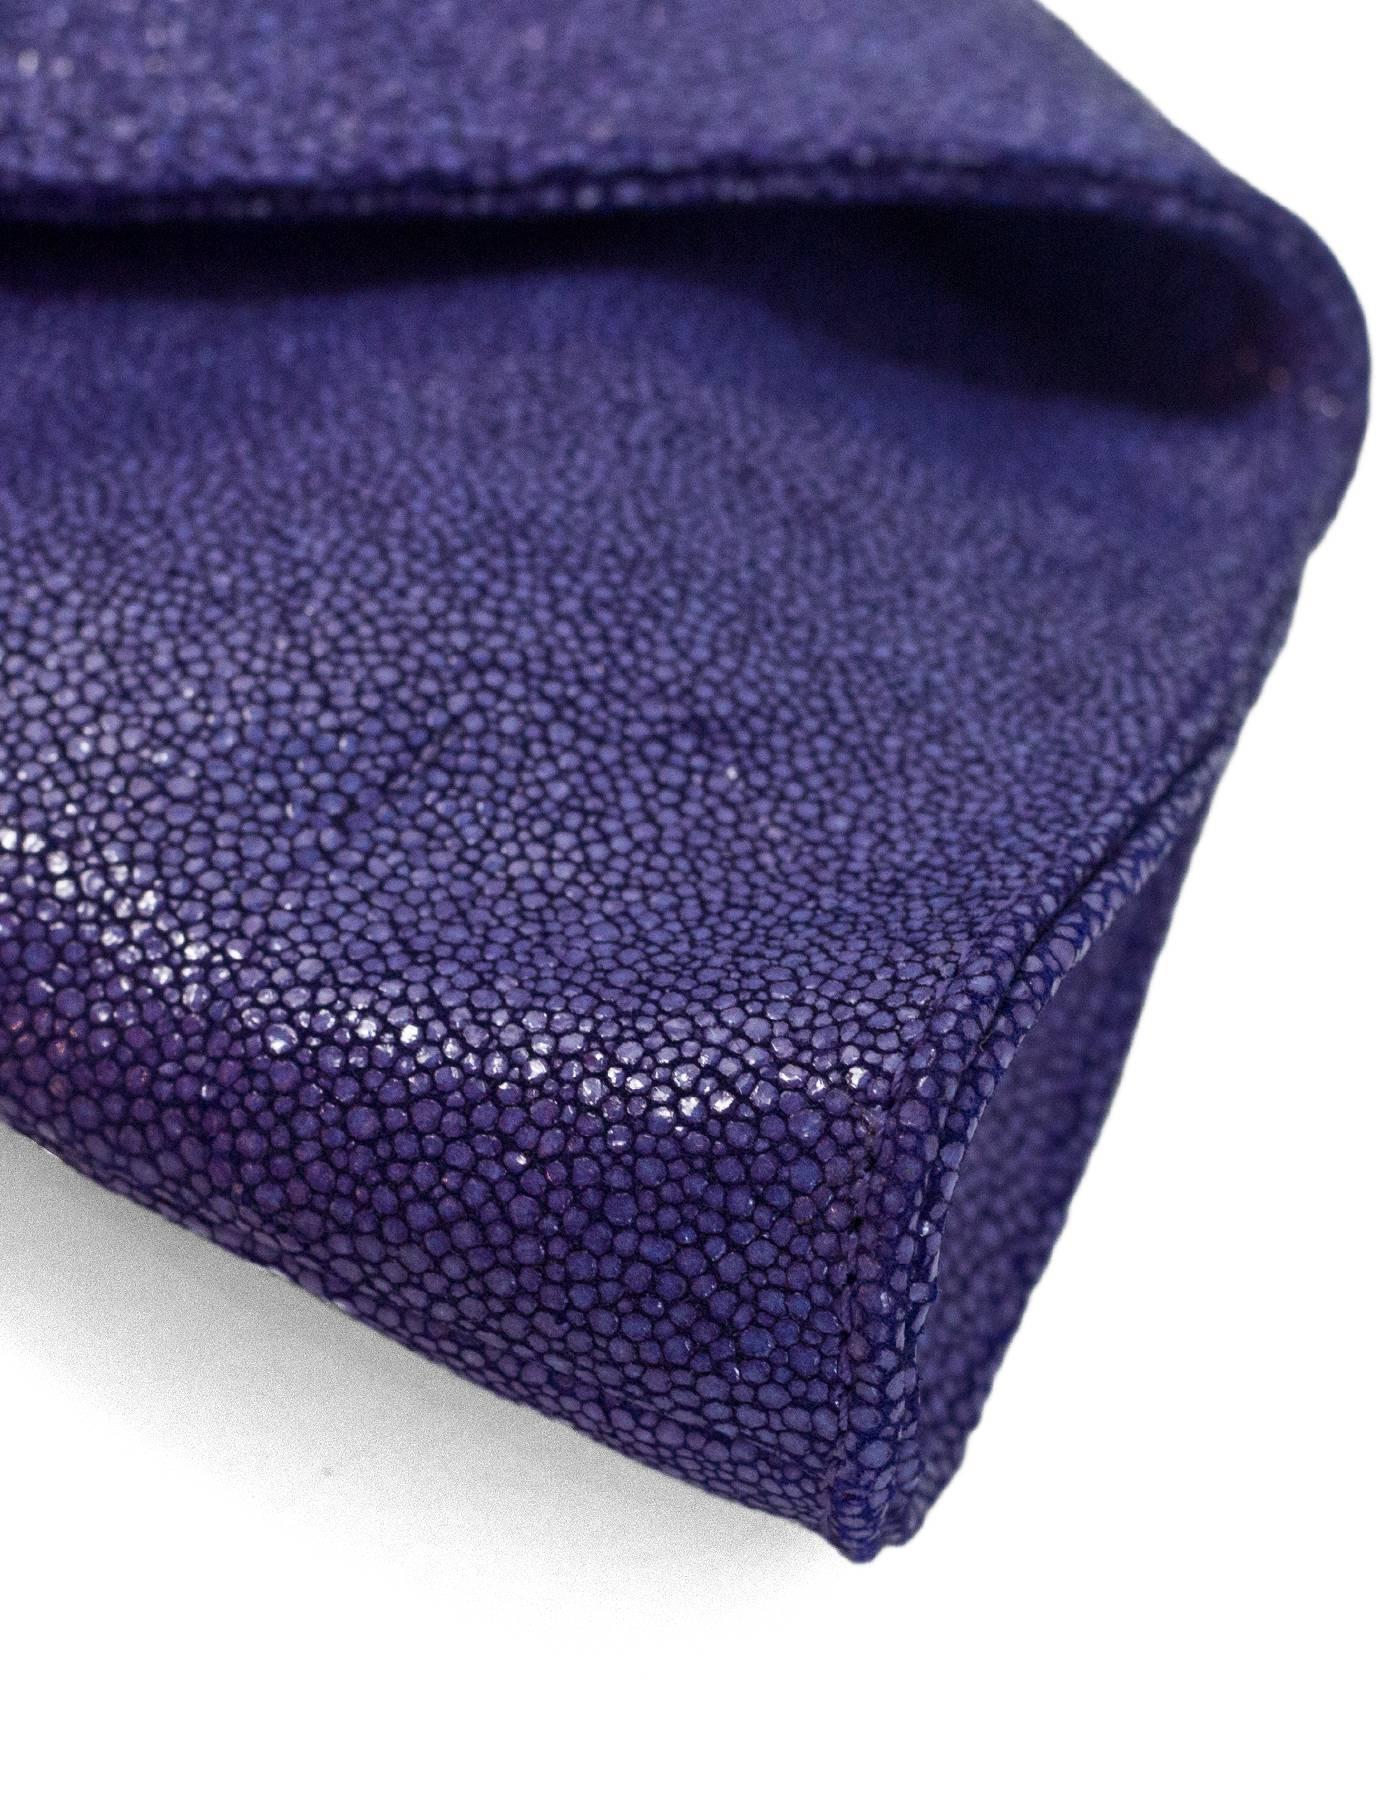 Emily Cho Purple Embossed Stingray Folded Clutch with Dust Bag rt. $595 1